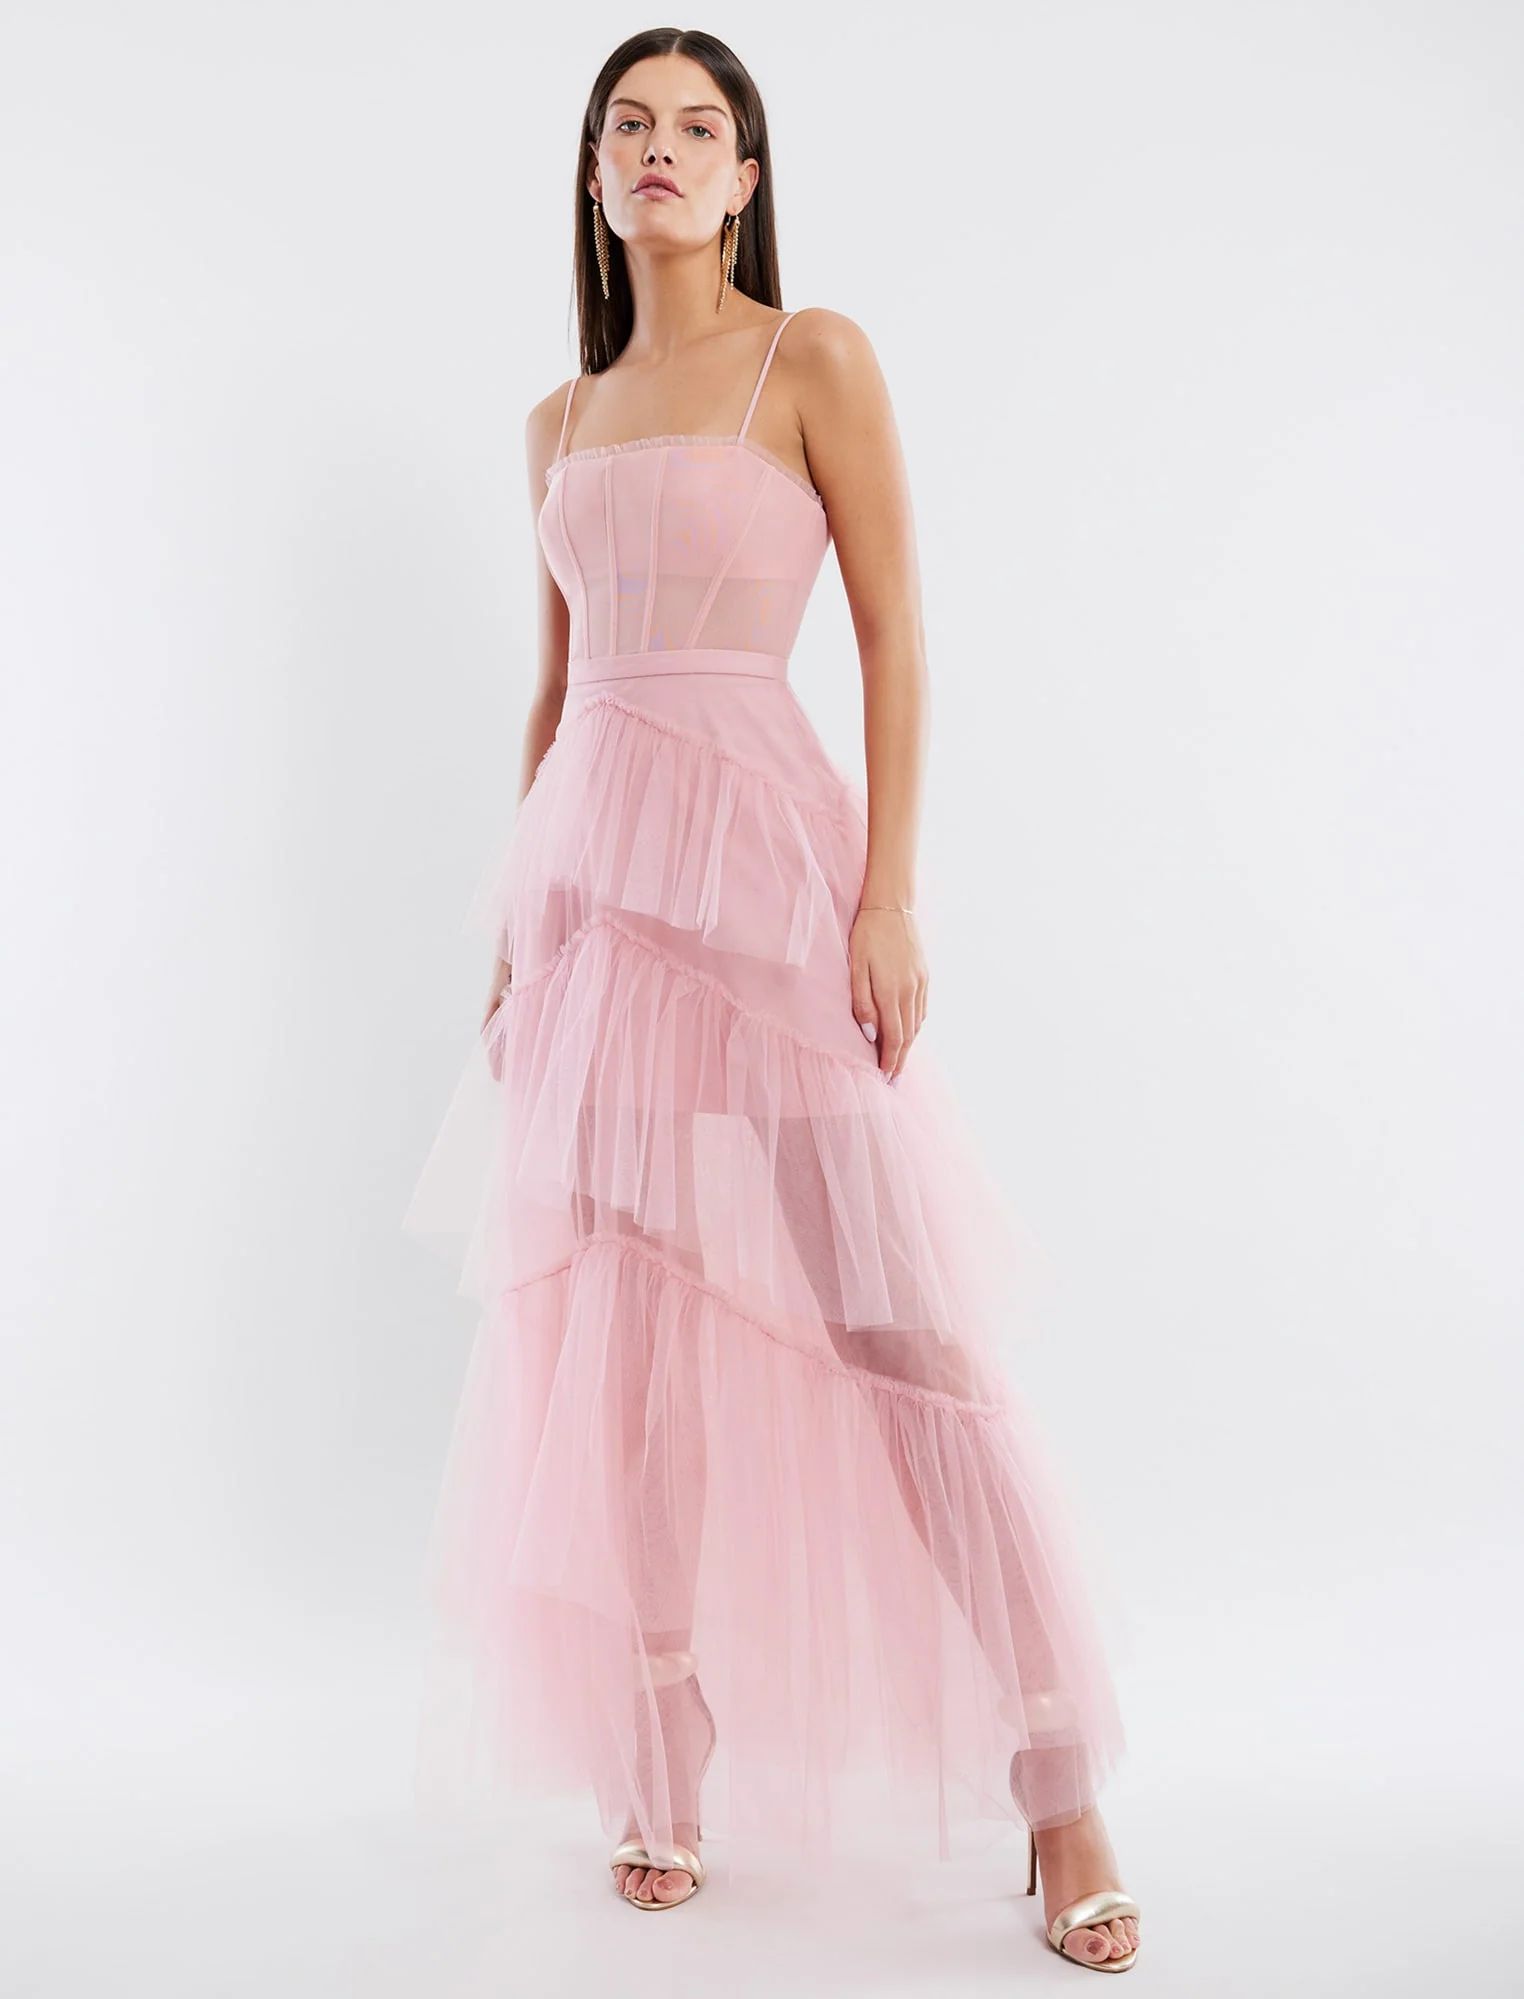 Oly Tiered Ruffle Tulle Evening Gown | BCBG Max Azria 